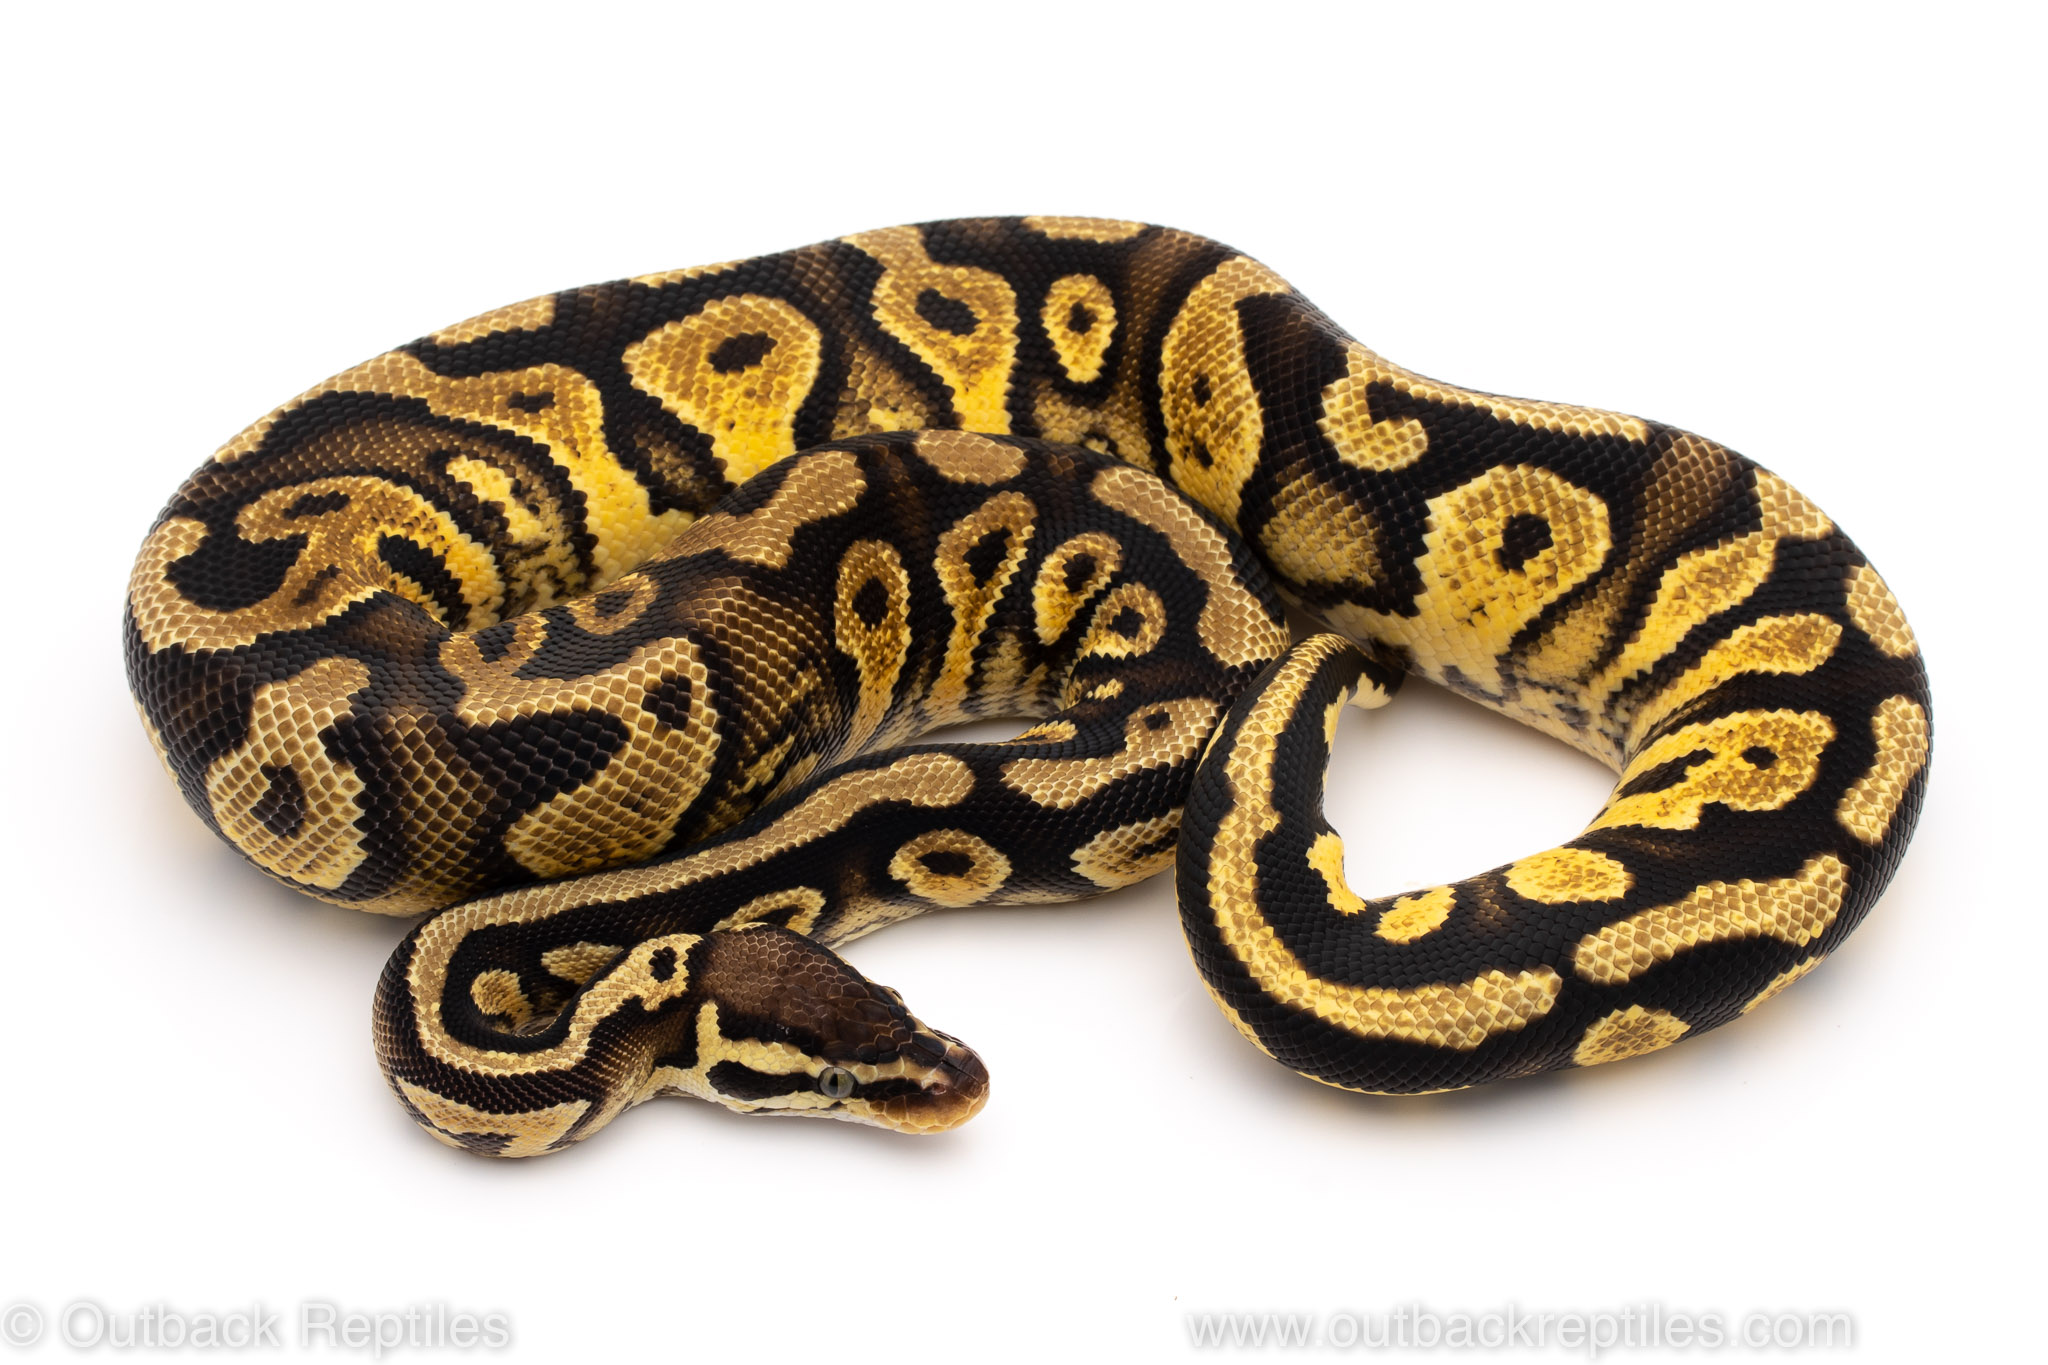 Pastel Yellowbelly ball python for sale